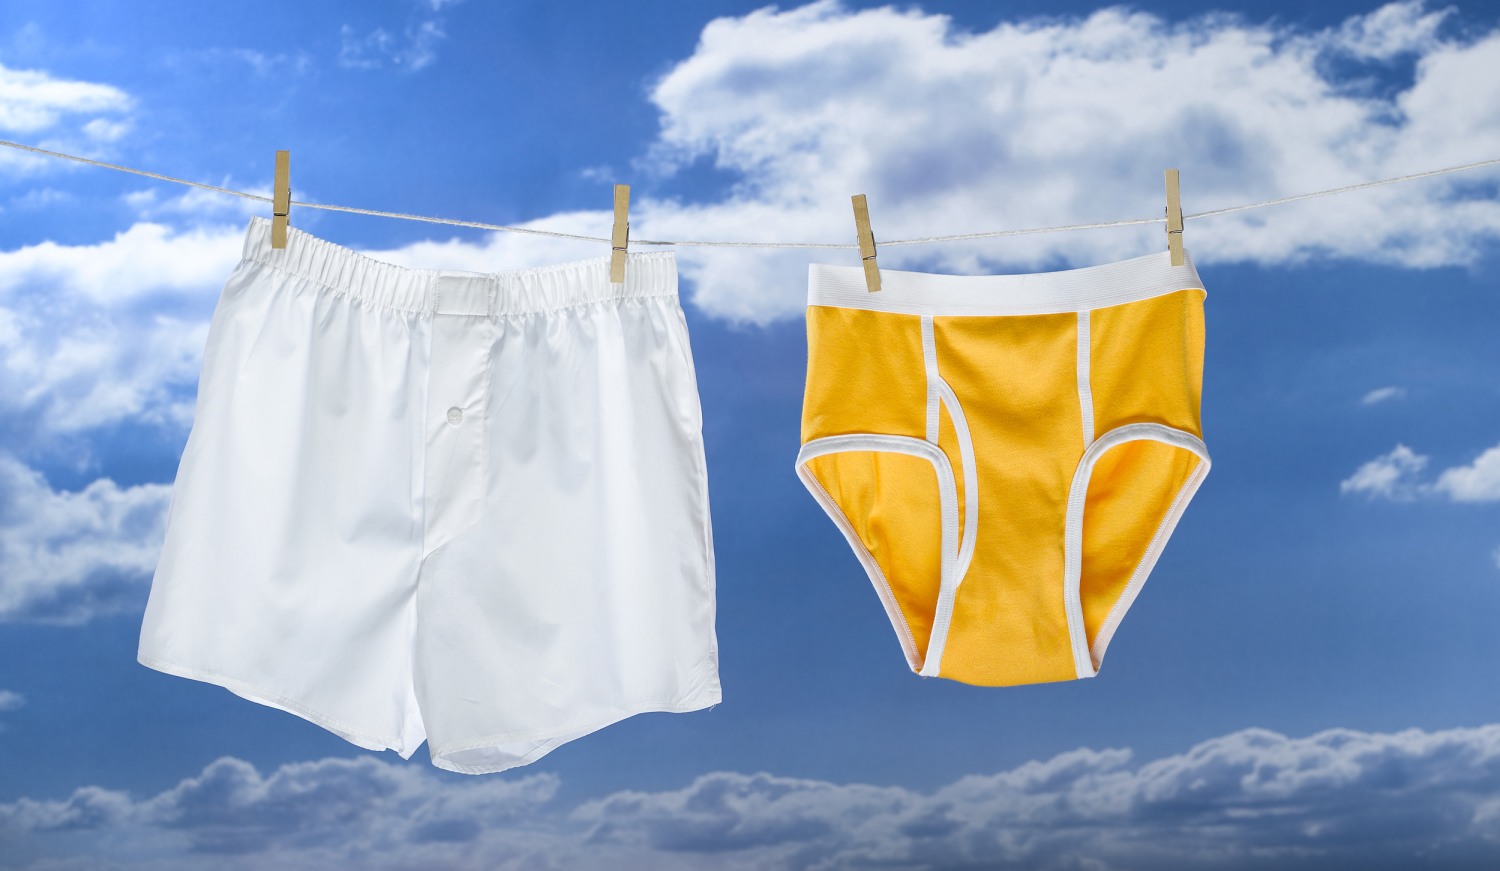 Boxers vs. Briefs and Sperm Count